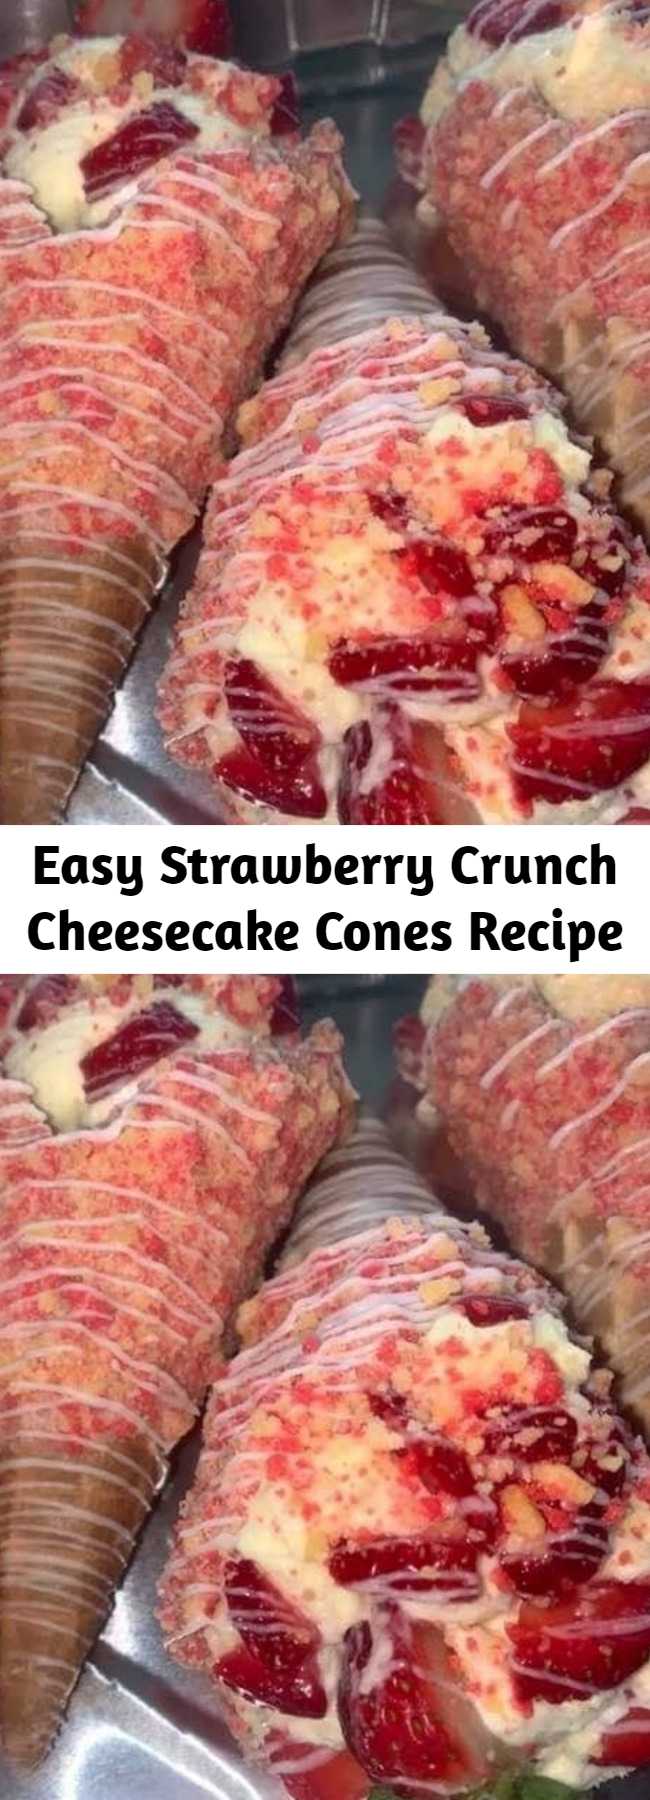 Easy Strawberry Crunch Cheesecake Cones Recipe - Omg, these are awesome. I have to head to the store because my kids are already asking again for some. A cheesecake made in the Instant Pot inspired by your favorite ice cream bar!